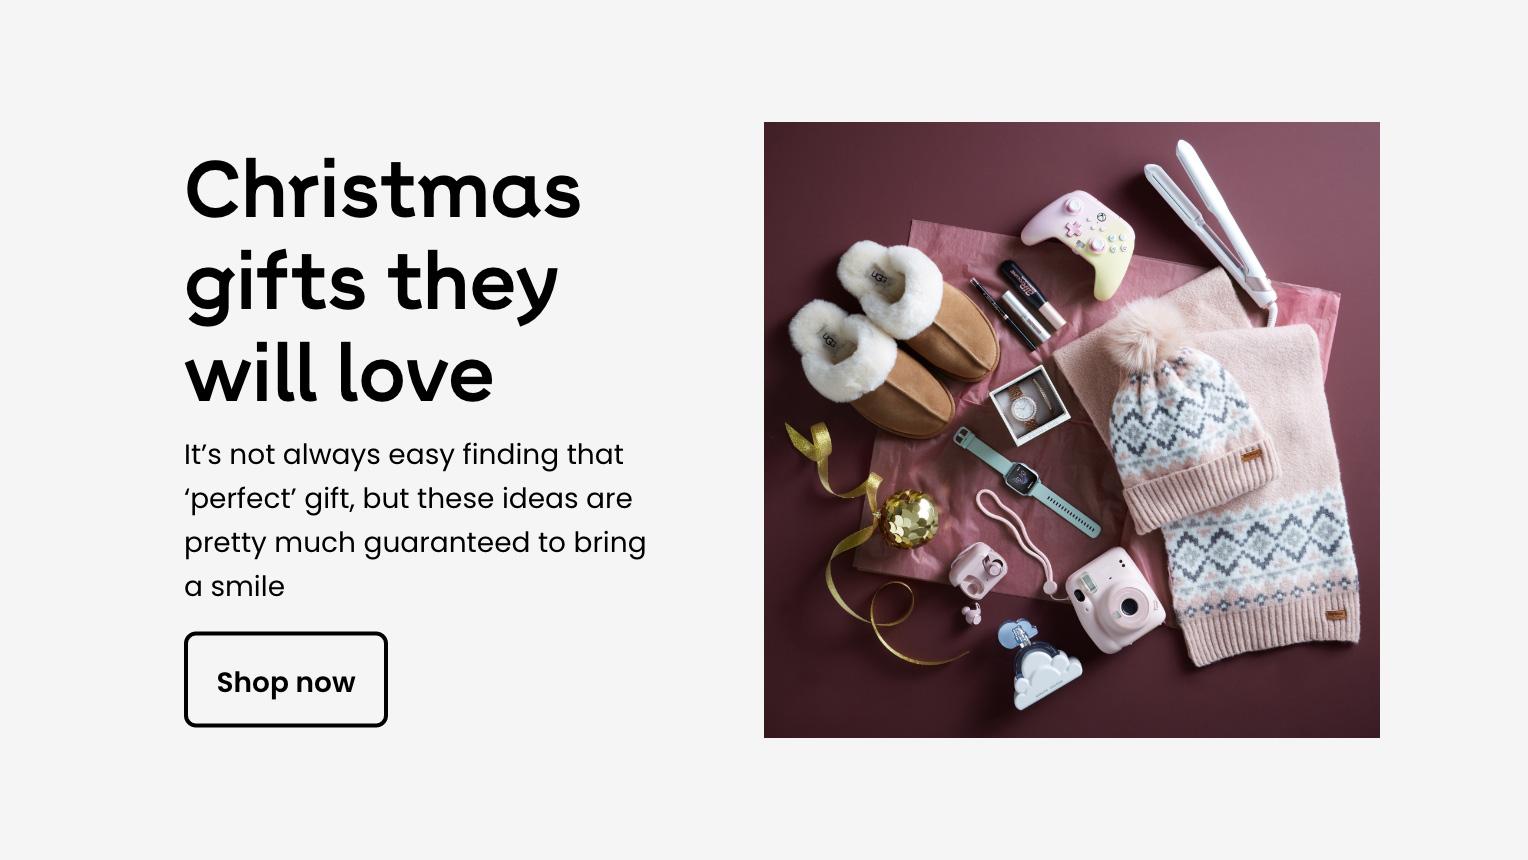 Christmas gifts they won't return. It's not always easy finding that 'perfect' gift, but these ideas are pretty much guaranteed to bring a smile. Shop now.